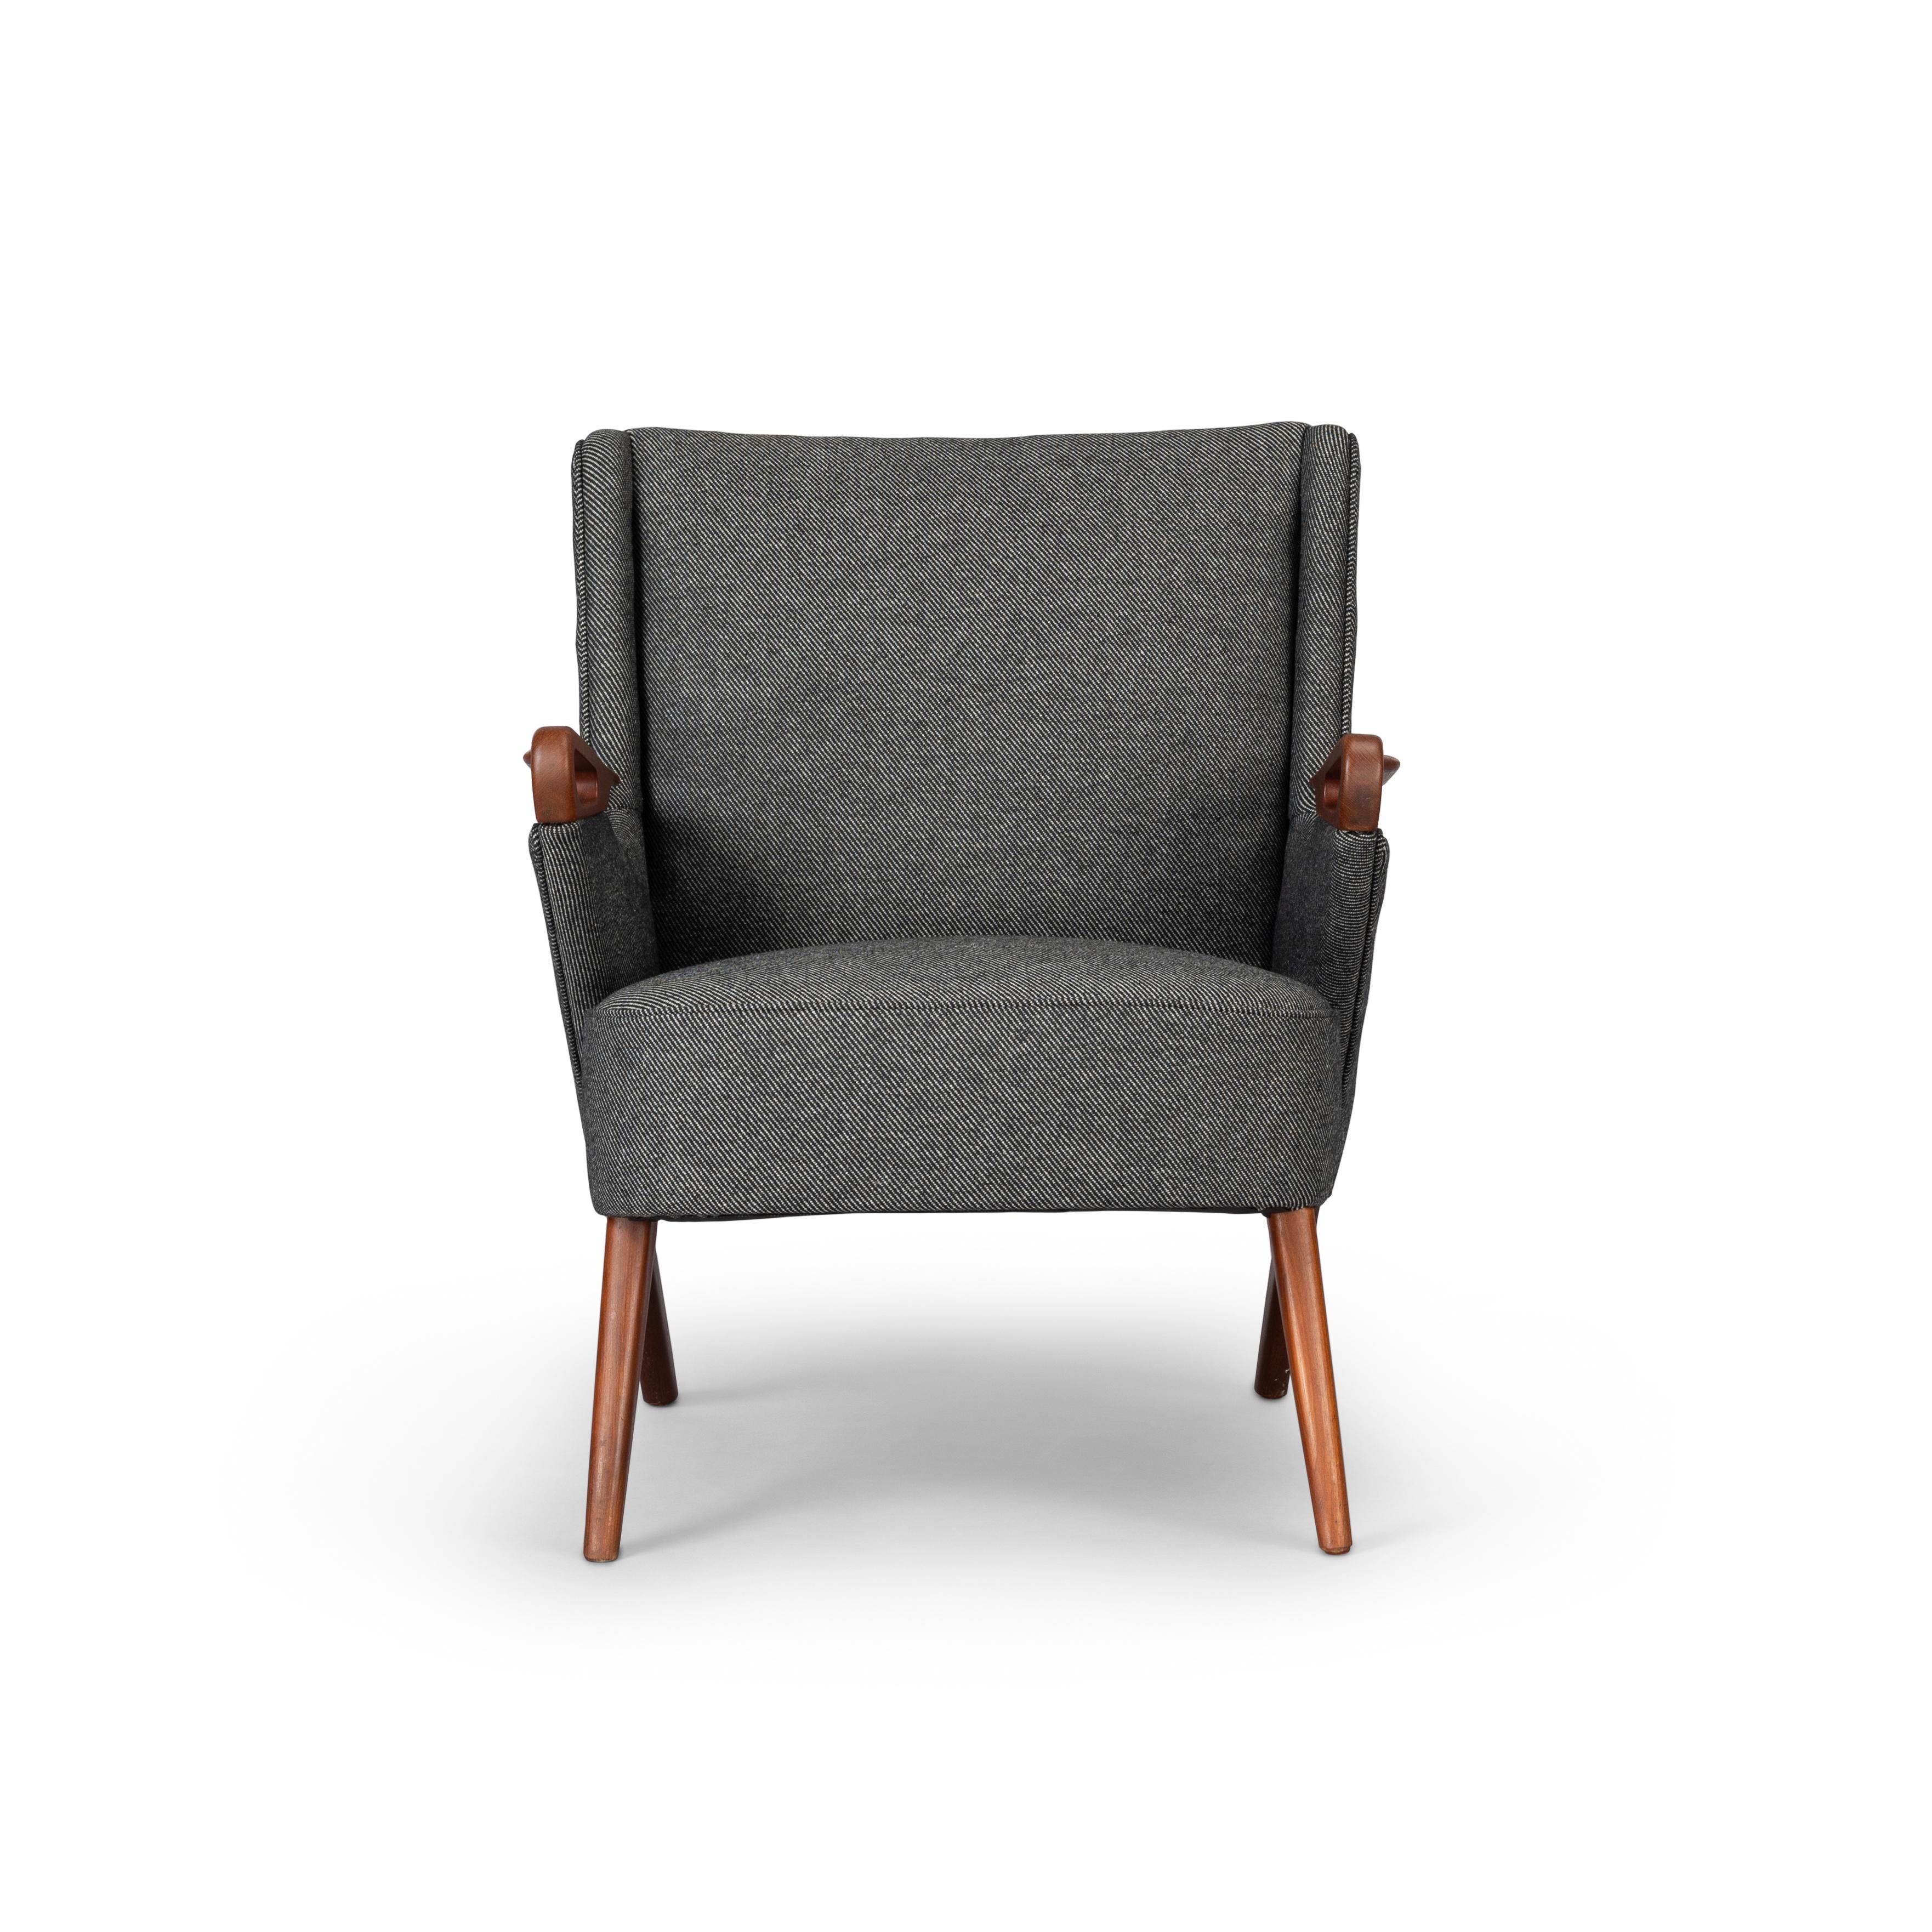 Midcentury designer lounge chair by Chresten Findahl Brodersen. This lounge chair was made under design No. CFB52 in the Findahl Møbelfabrik in the mid-1950s (Denmark). This is as pure as midcentury quality in chair form gets, beautiful lines and